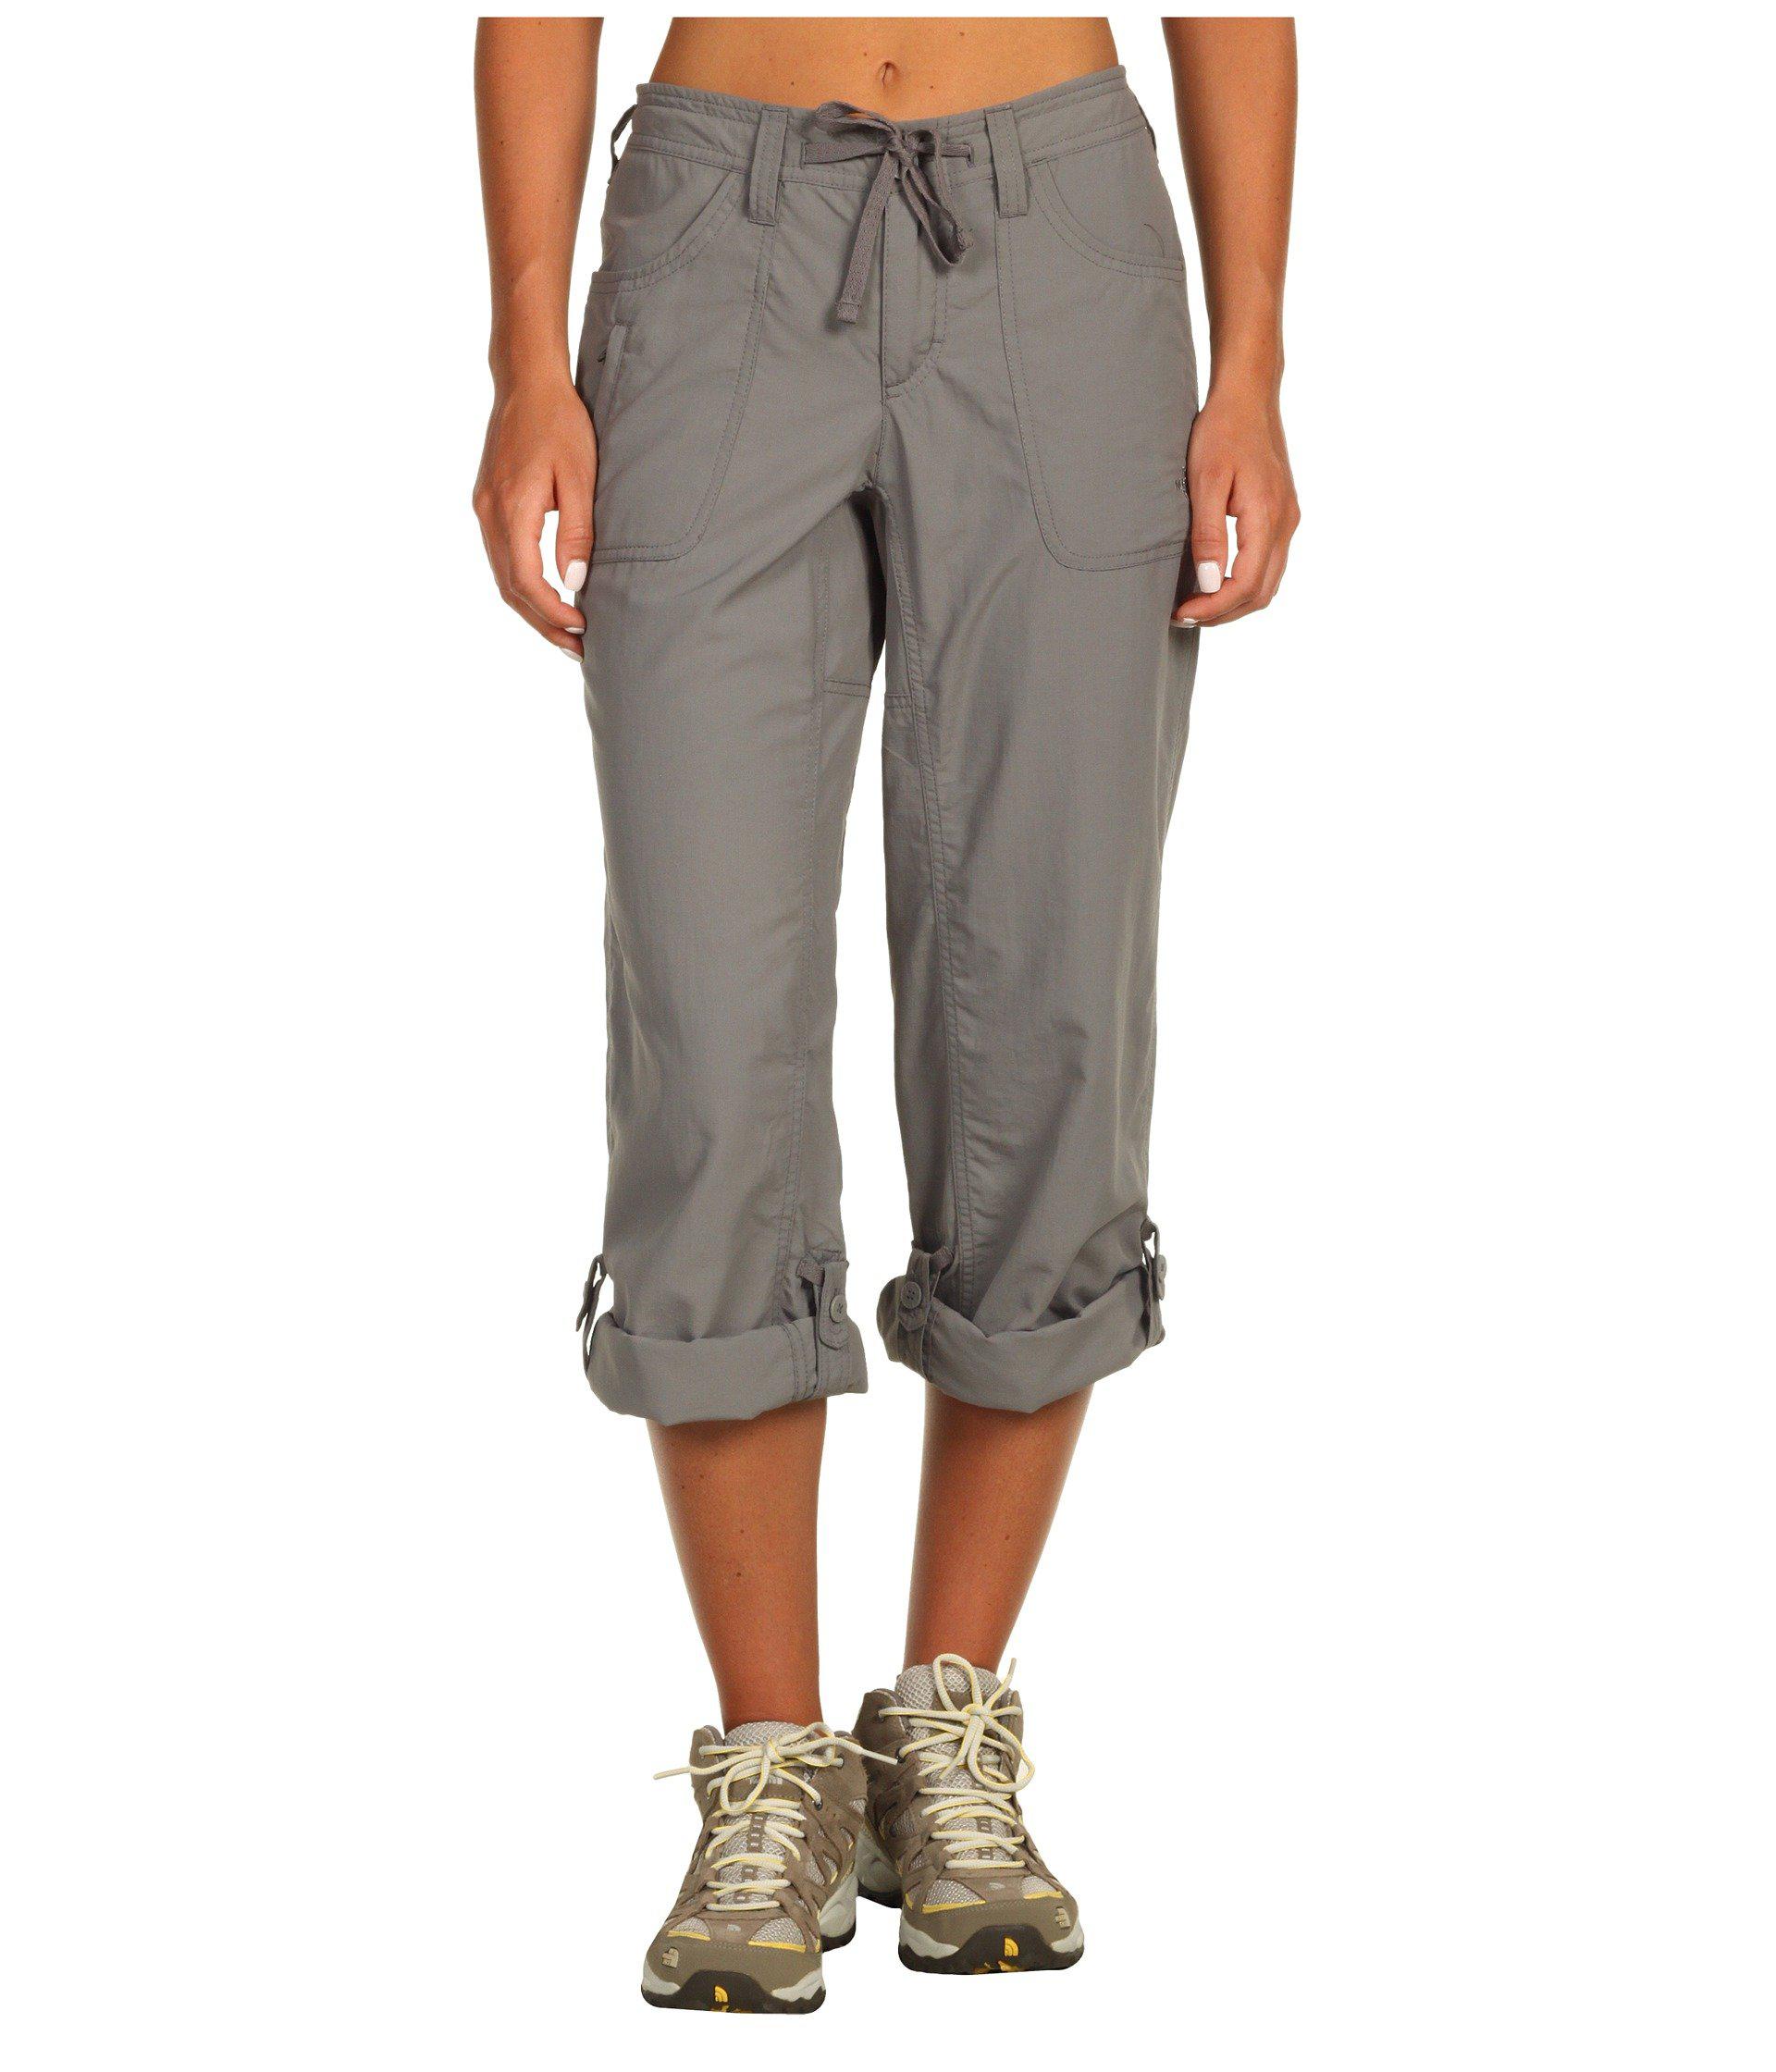 Feodaal leg uit chaos north face horizon trousers